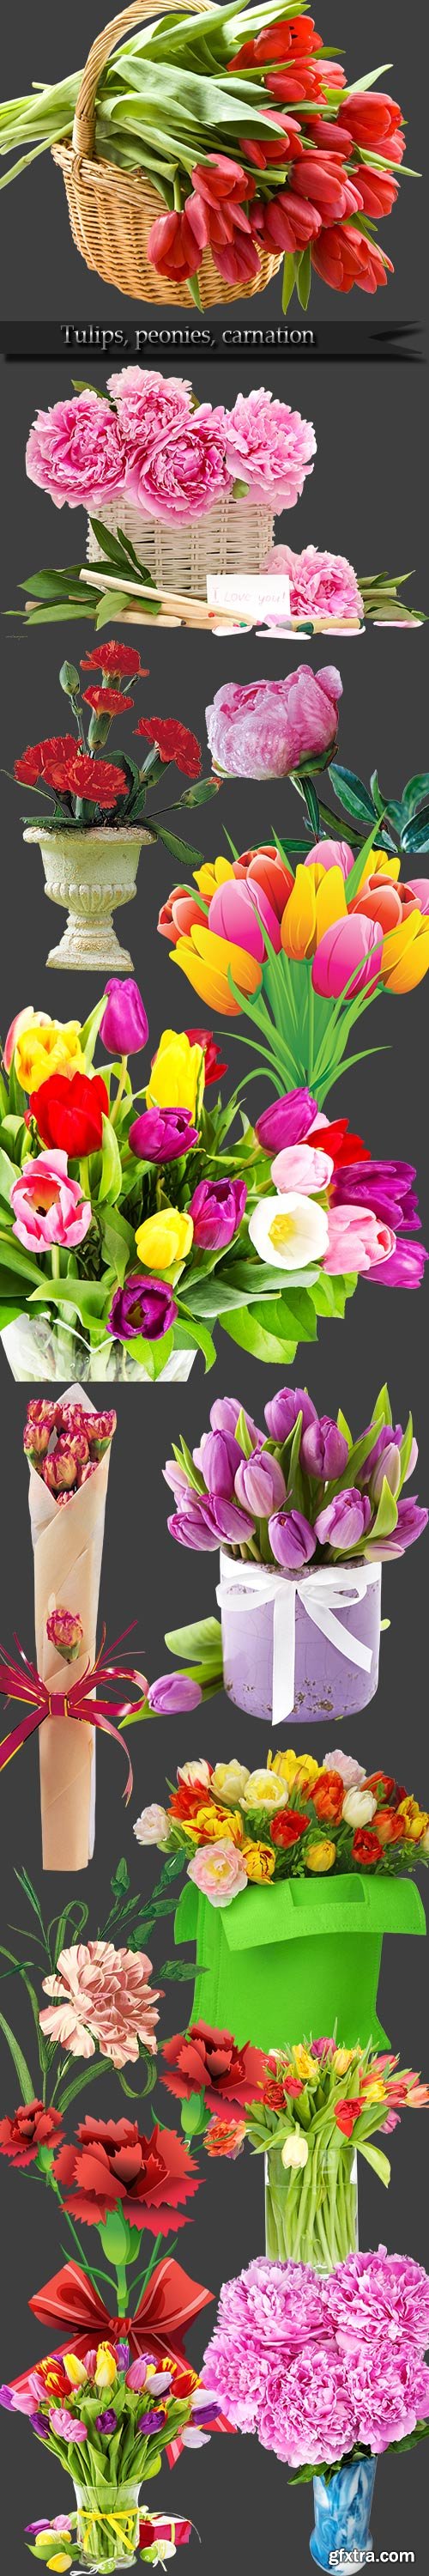 Tulips, peonies, carnation on a transparent background